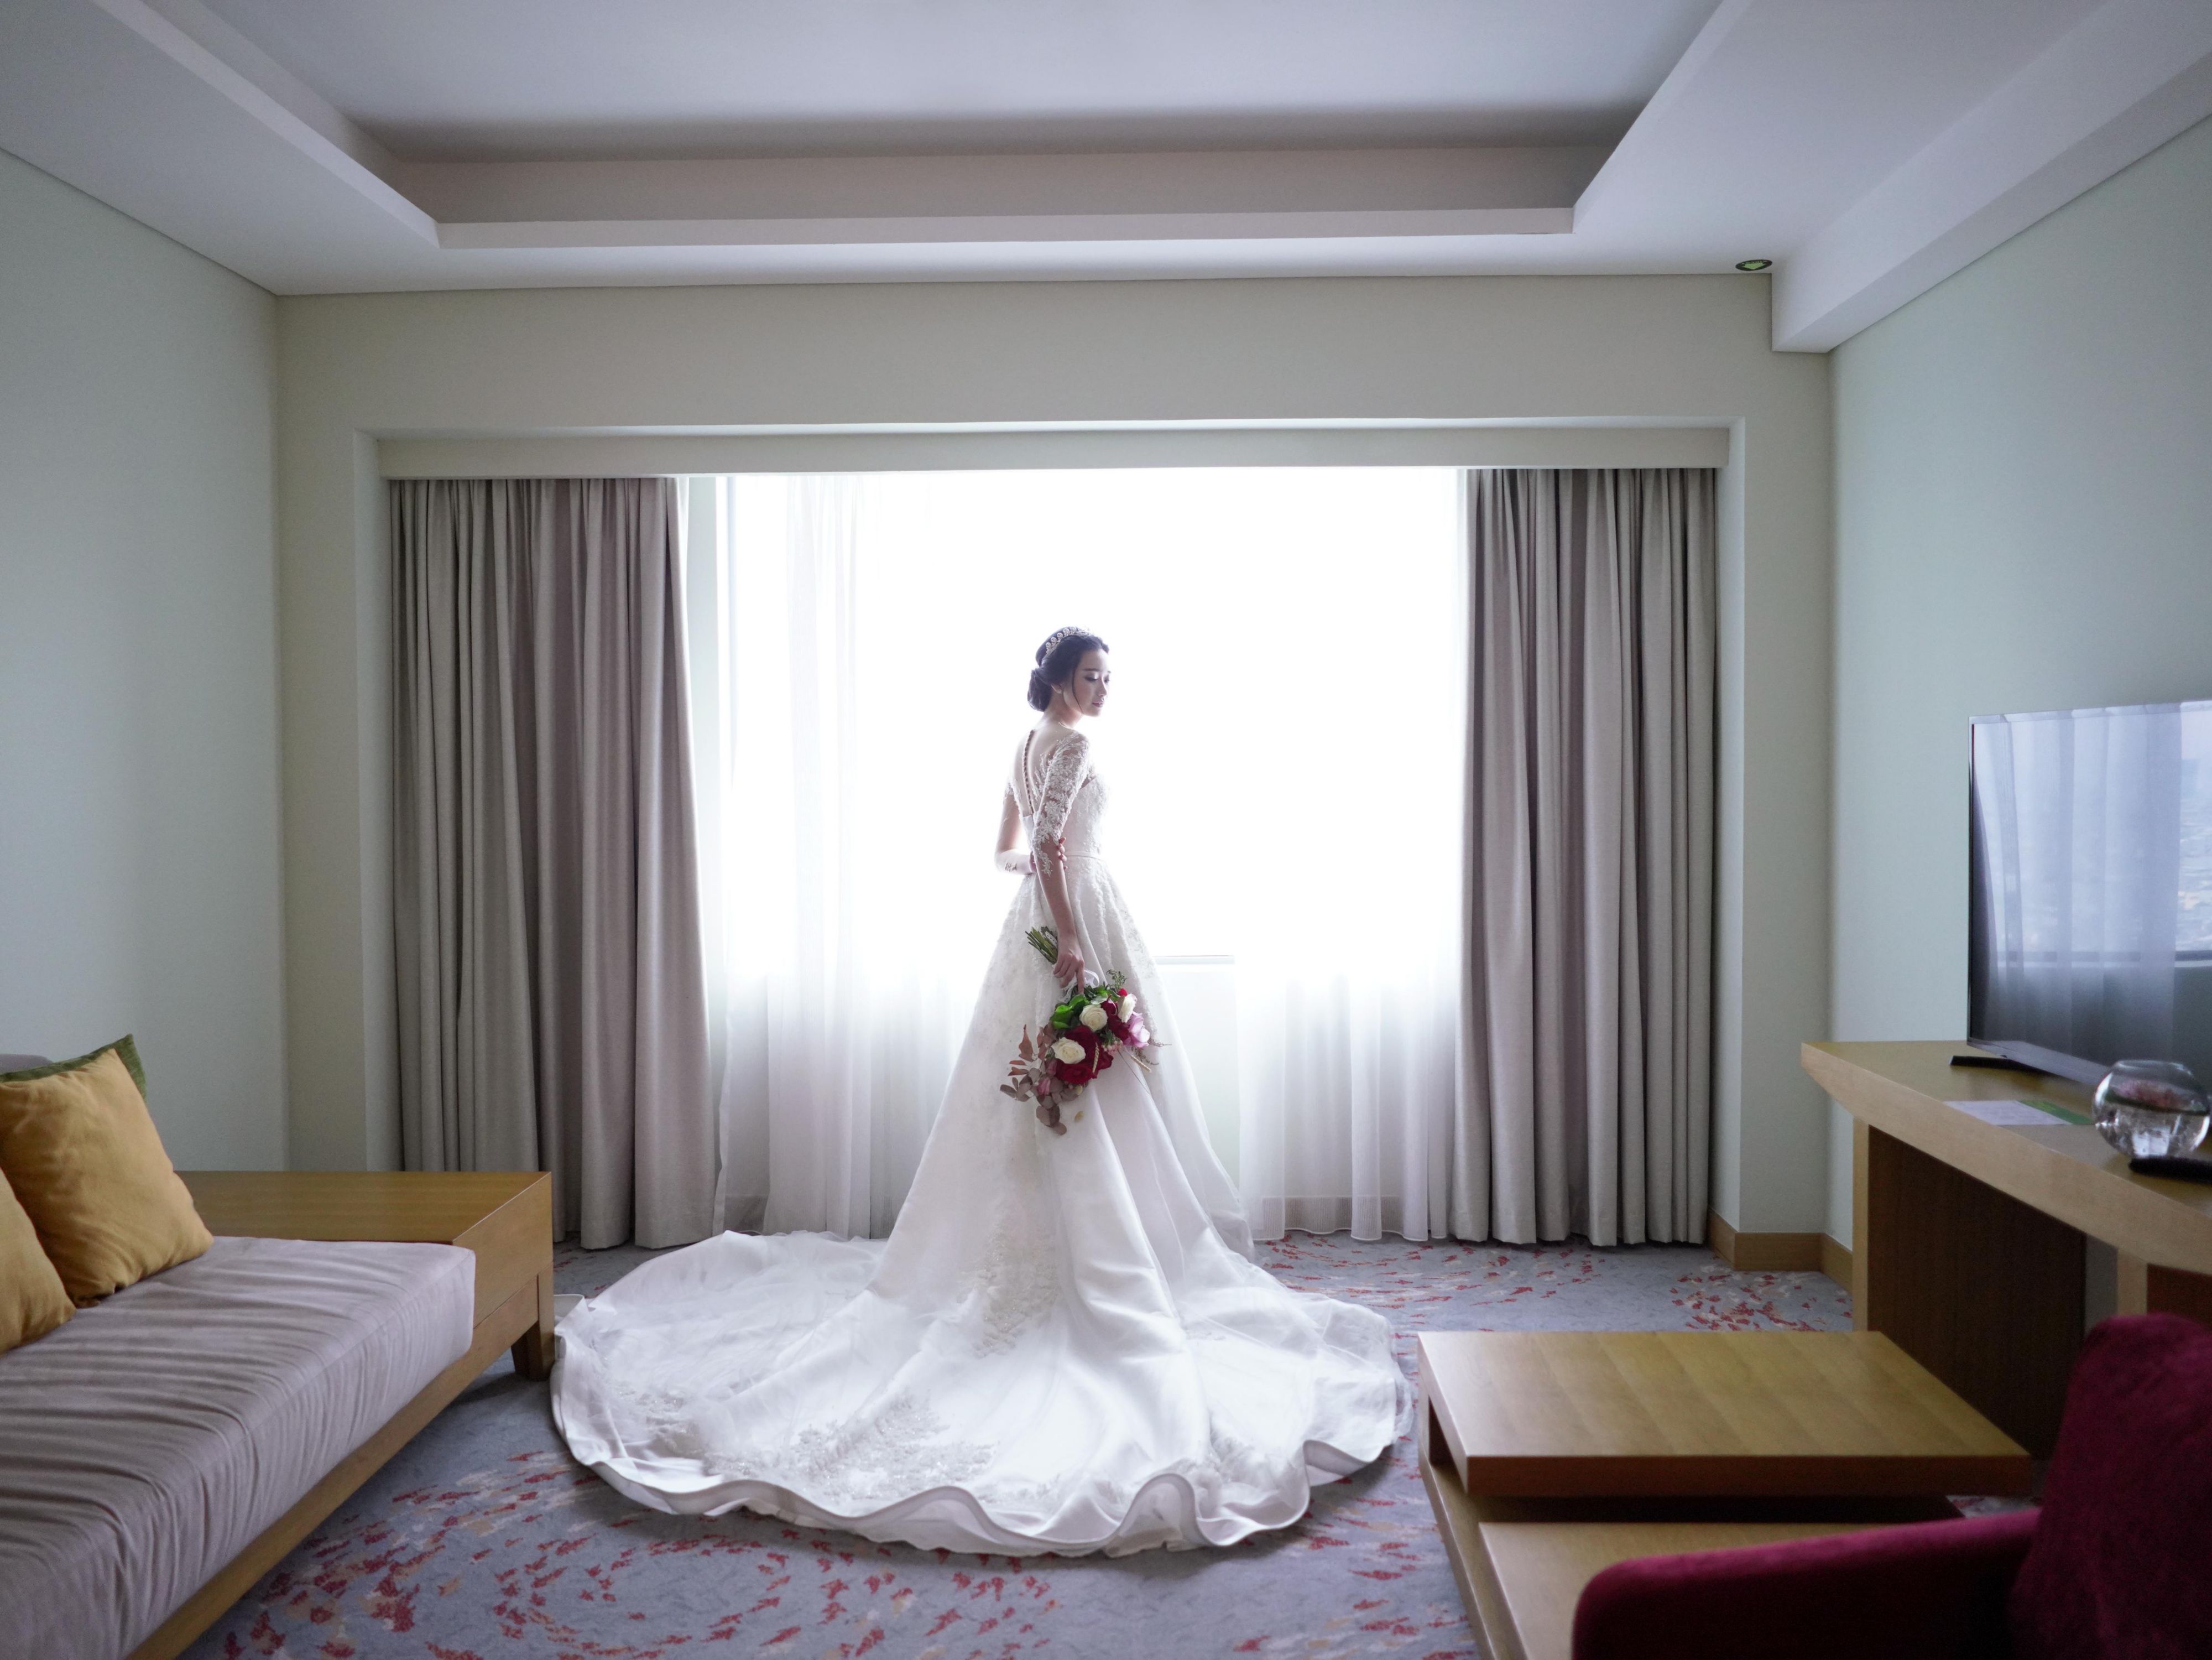 Make your big day memorable for both you and your guests by holding your wedding at Holiday Inn & Suites Jakarta Gajah Mada. With our full-service venues and caring service, we can help you plan, book and celebrate your wedding and all of its milestones in style.